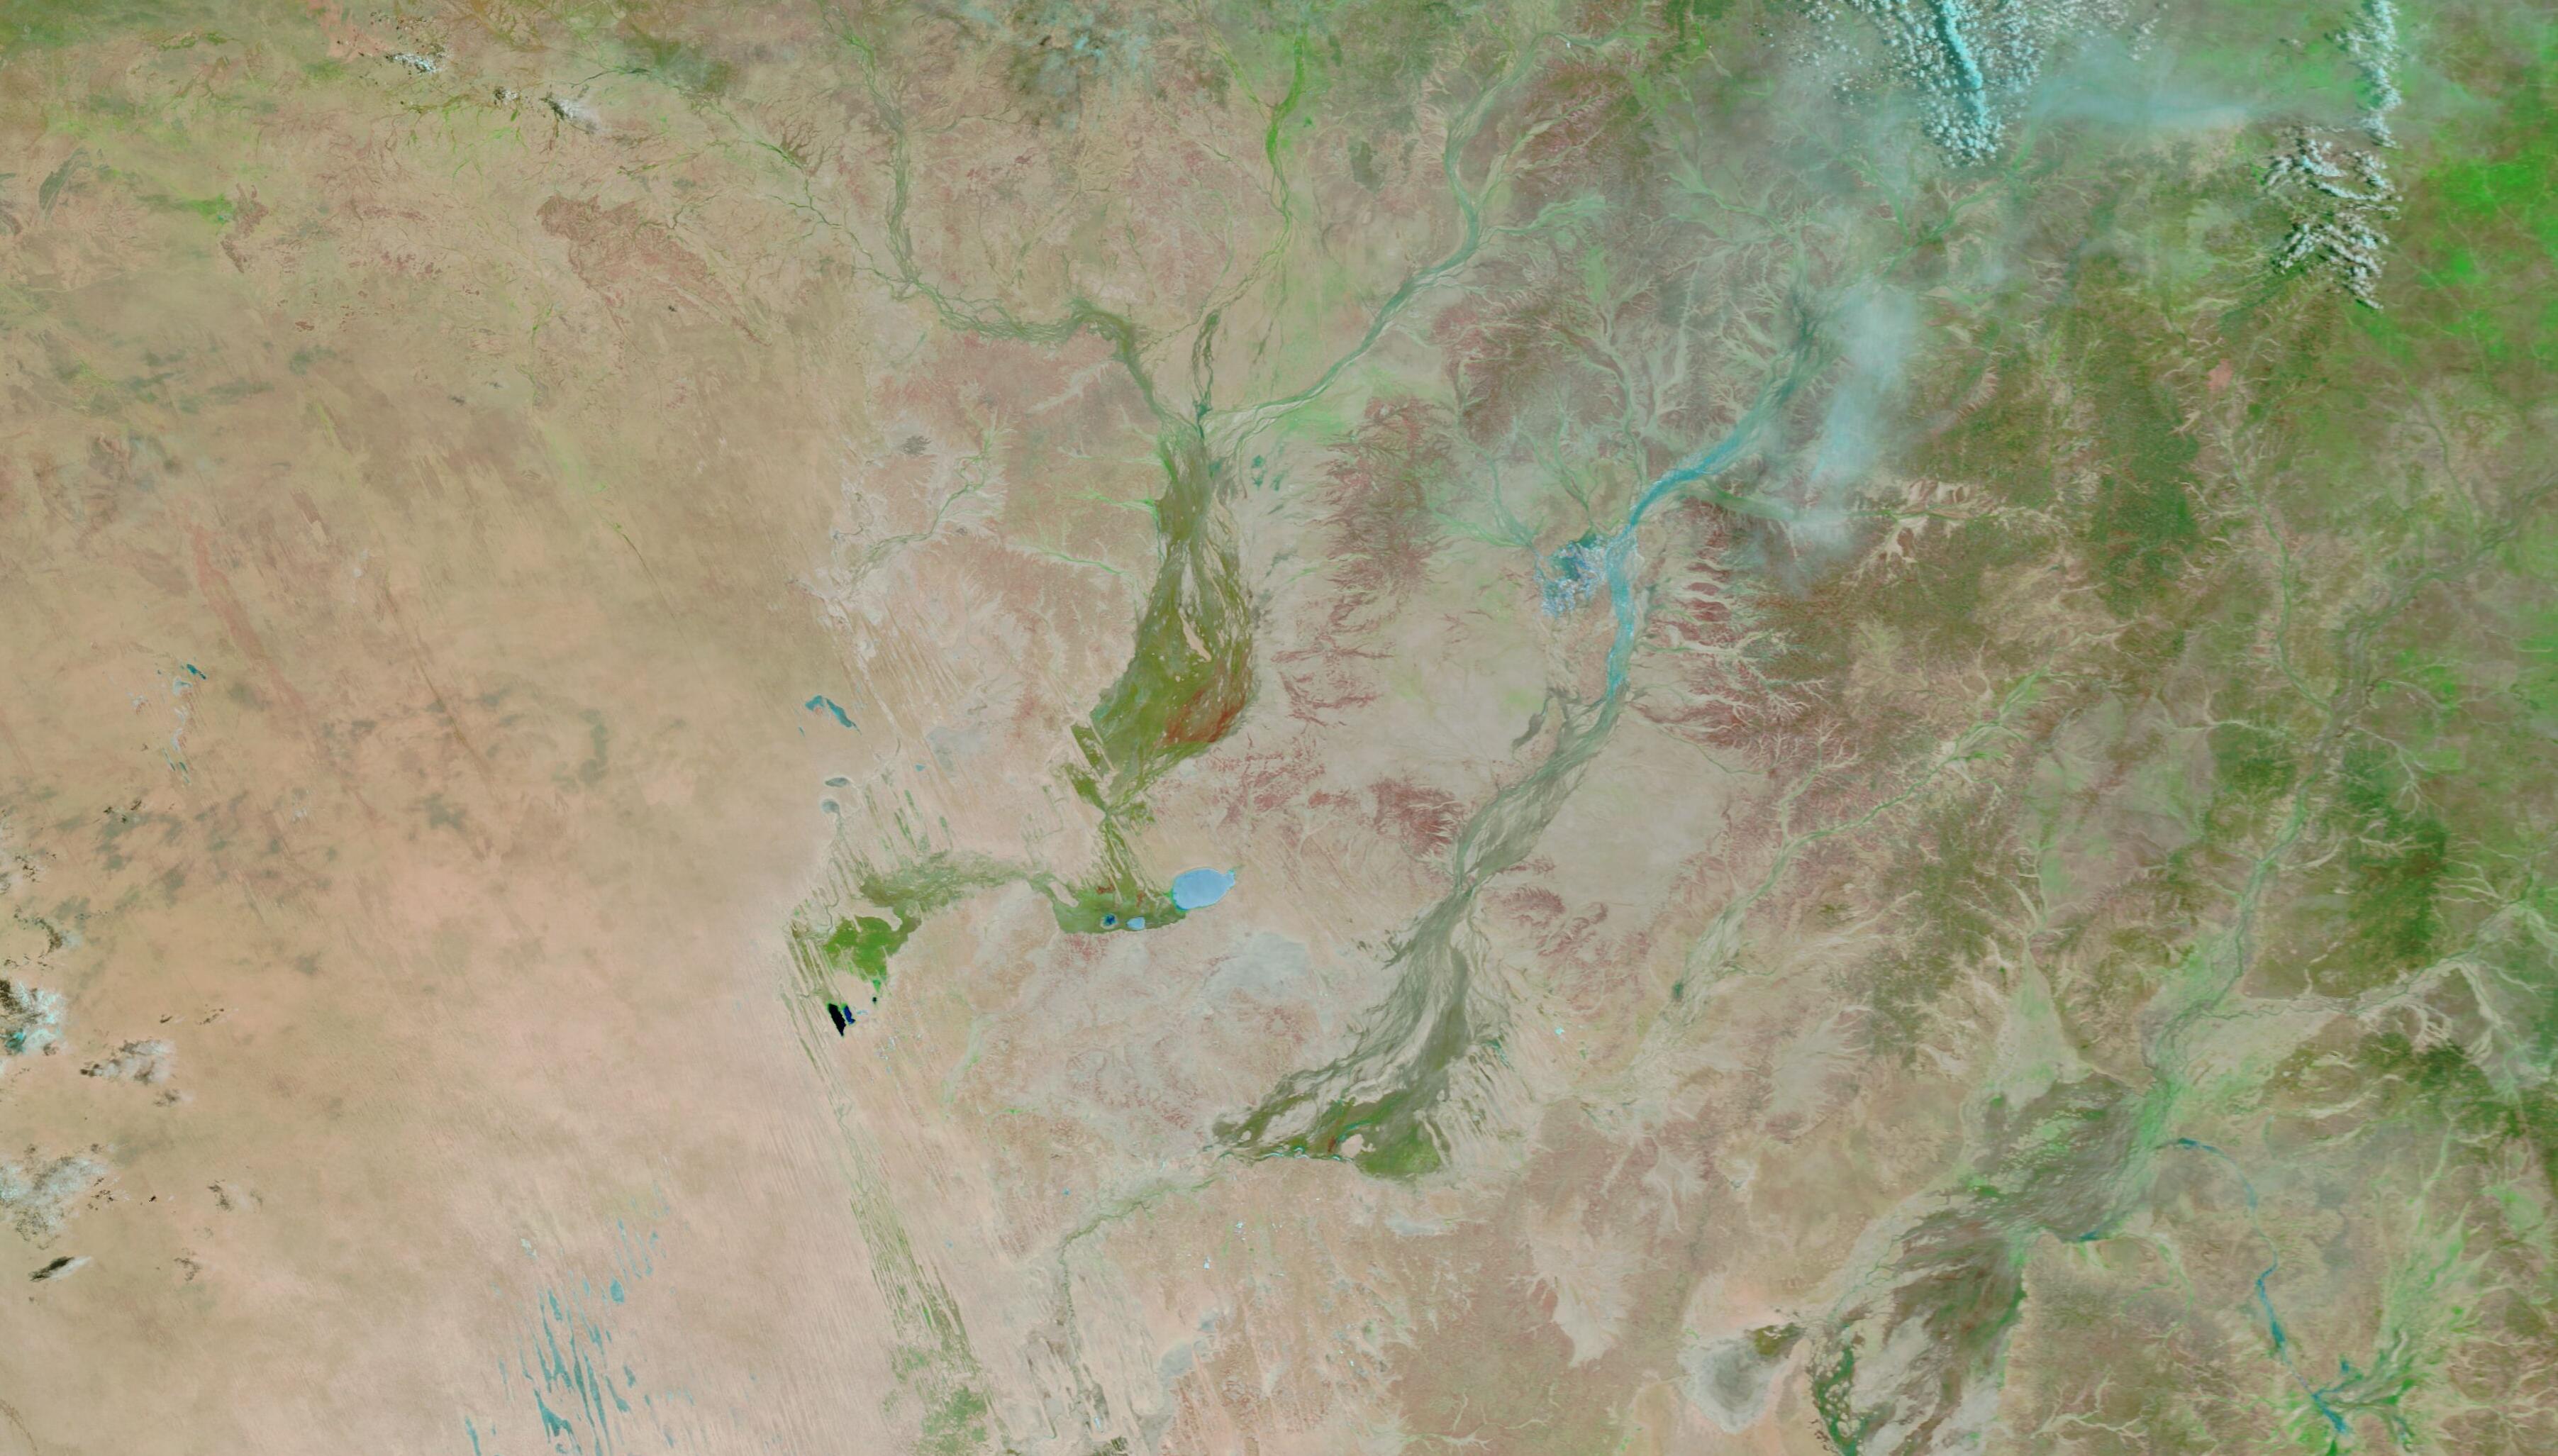 Flooding in outback Qld NSW seen from space